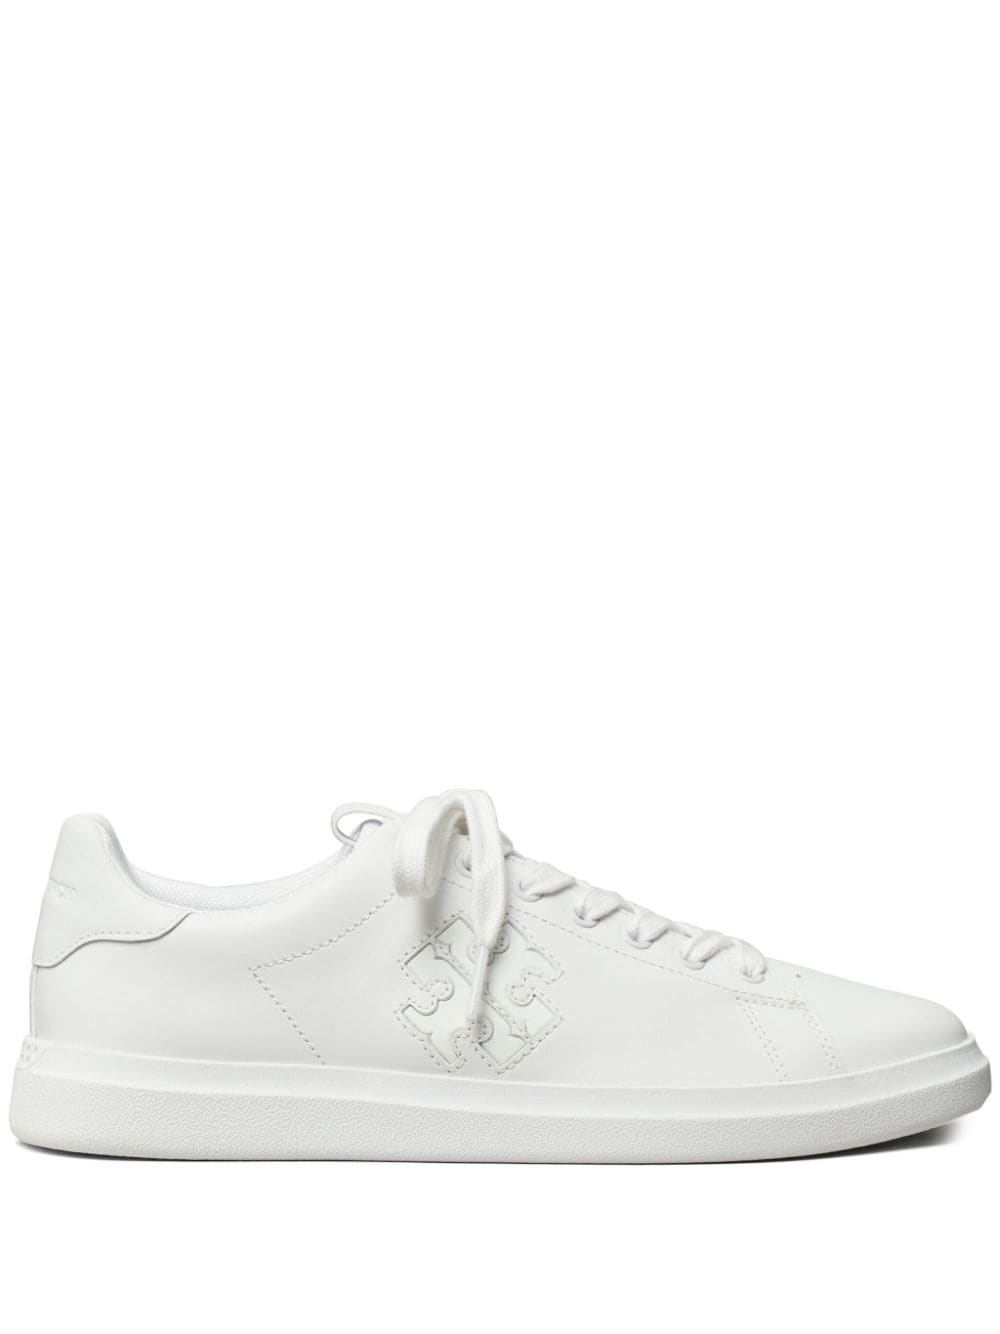 Image 1 of Tory Burch Double T Howell leather sneakers